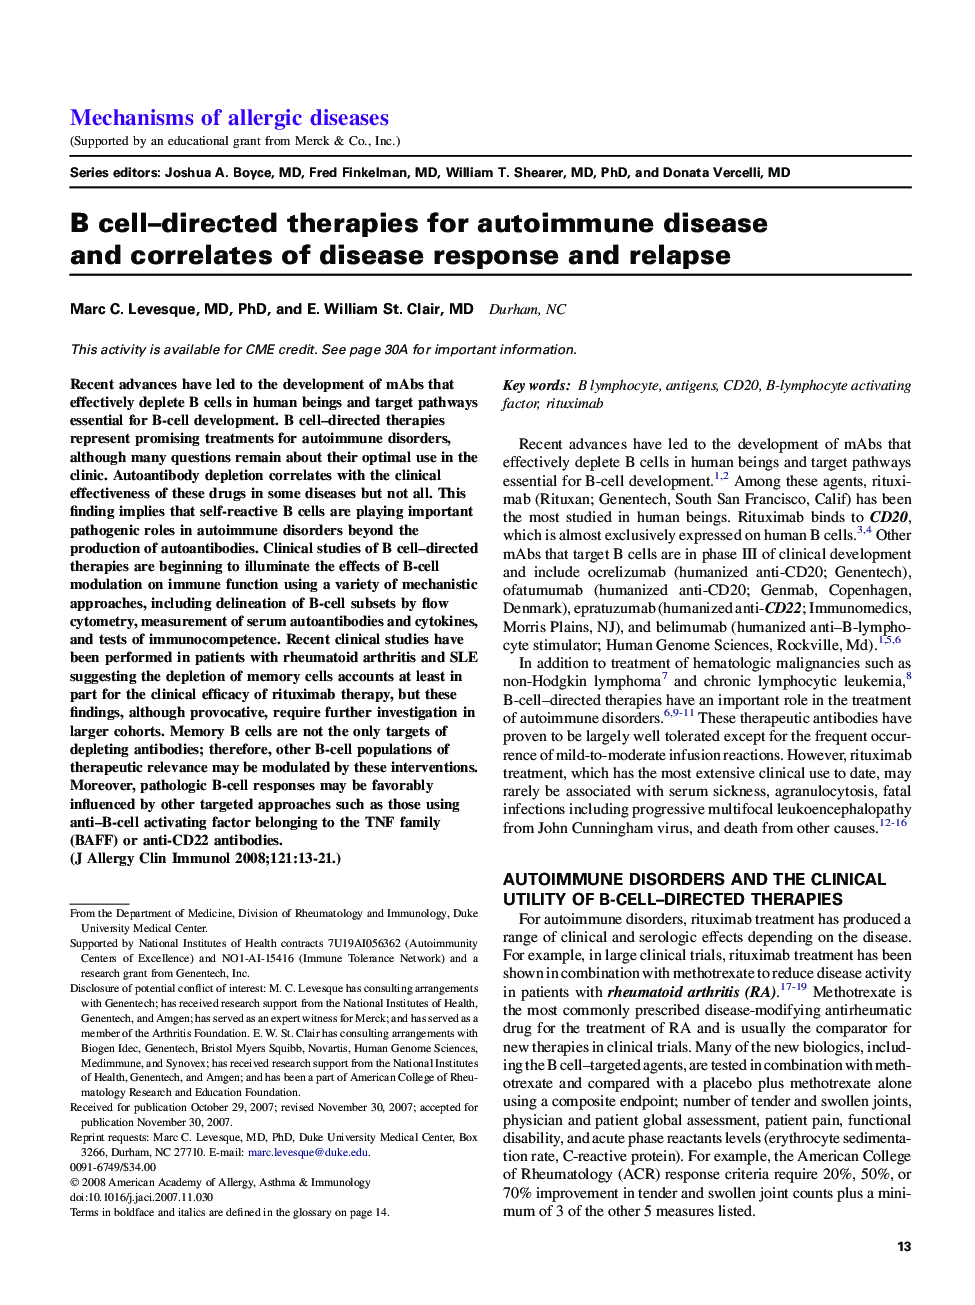 B cell–directed therapies for autoimmune disease and correlates of disease response and relapse 